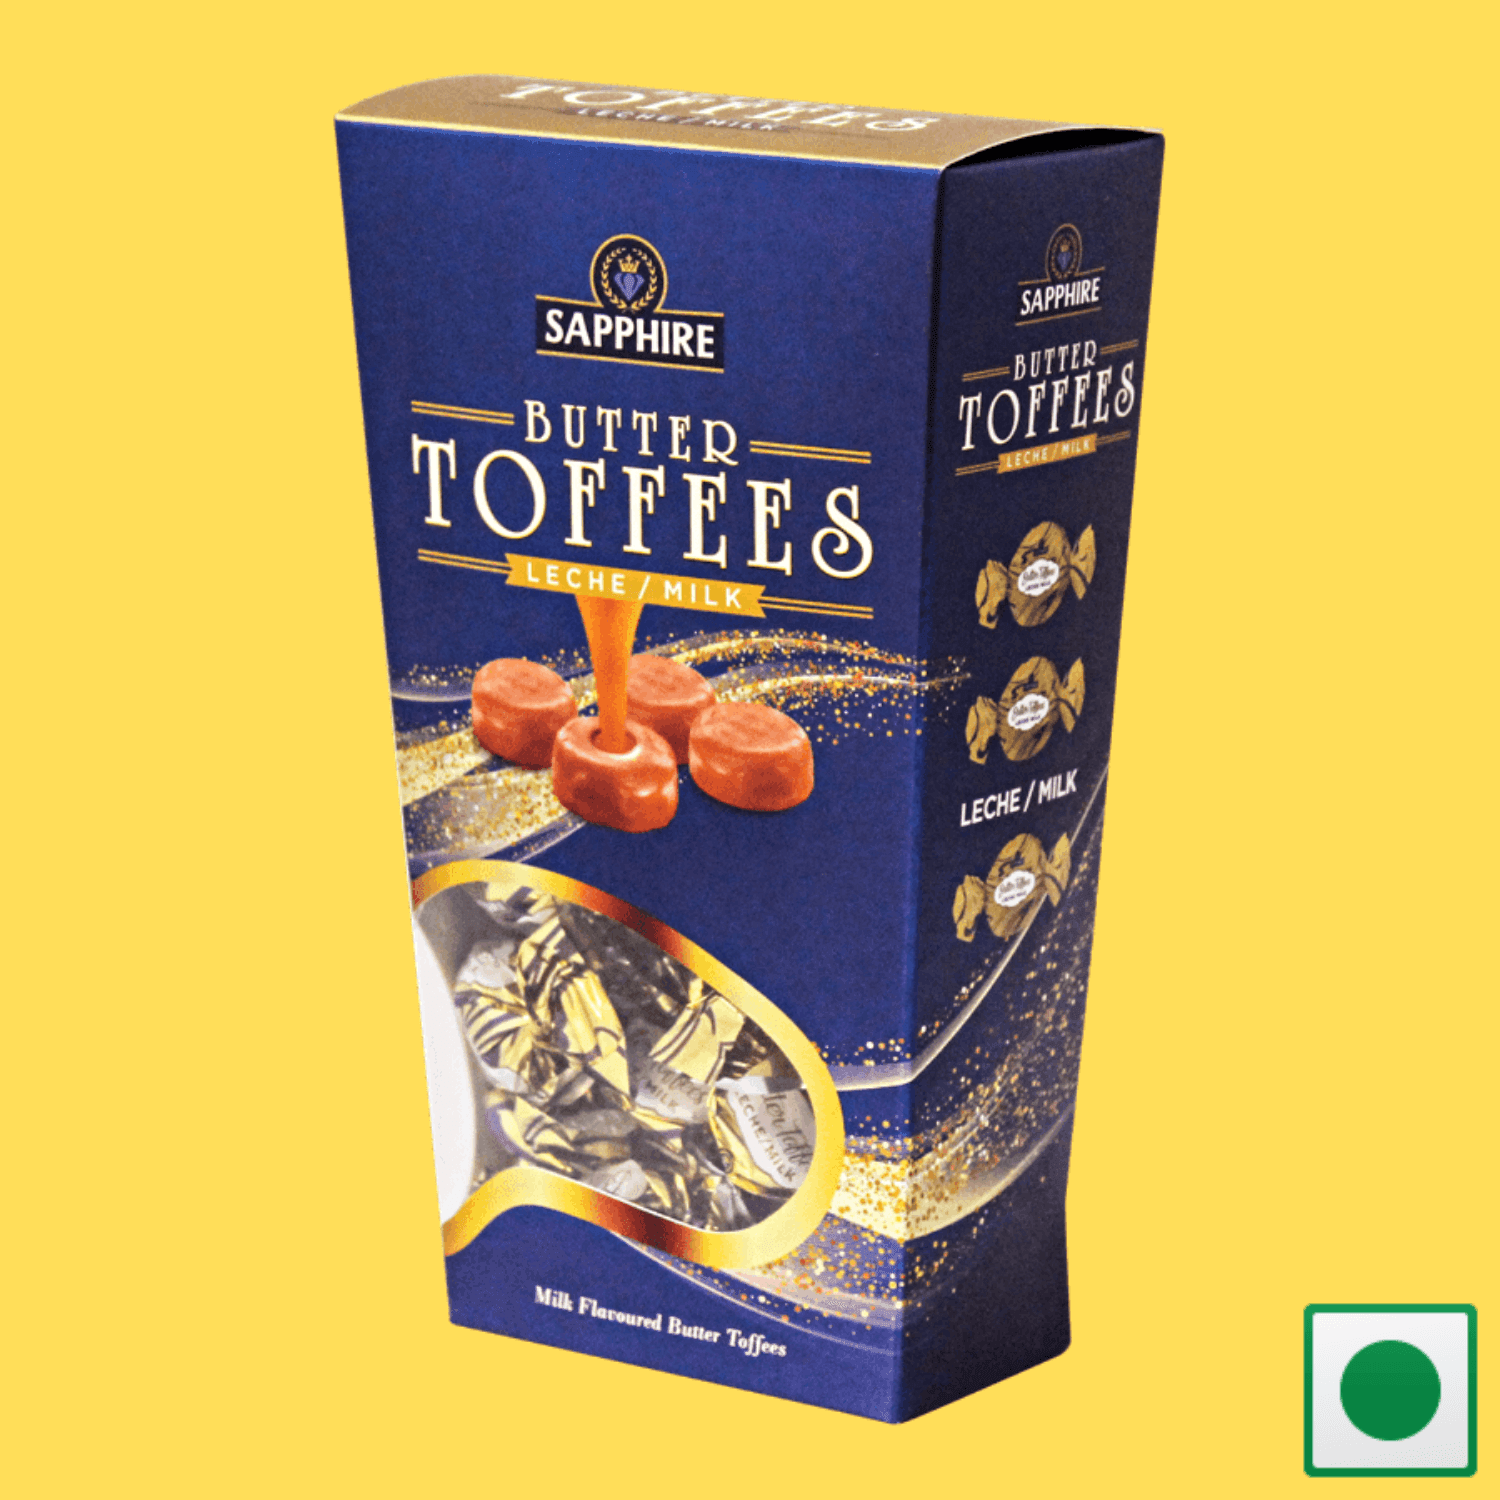 SAPPHIRE BUTTER TOFFEES LECHE/MILK 300GM (Imported) - Super 7 Mart